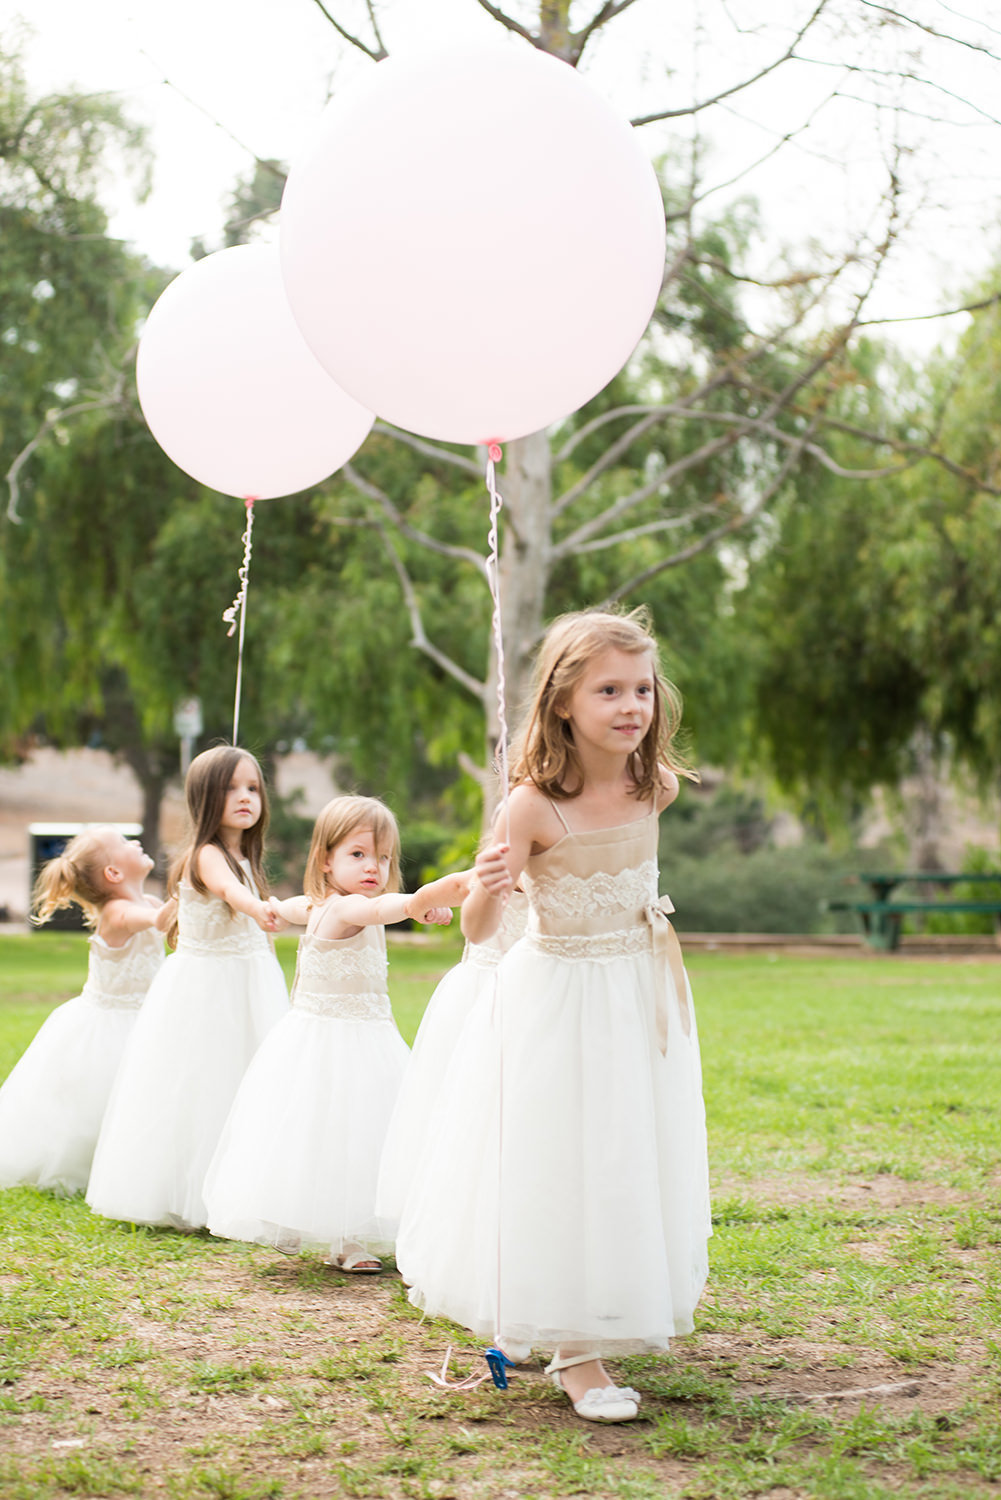 cute flower girl image with balloons